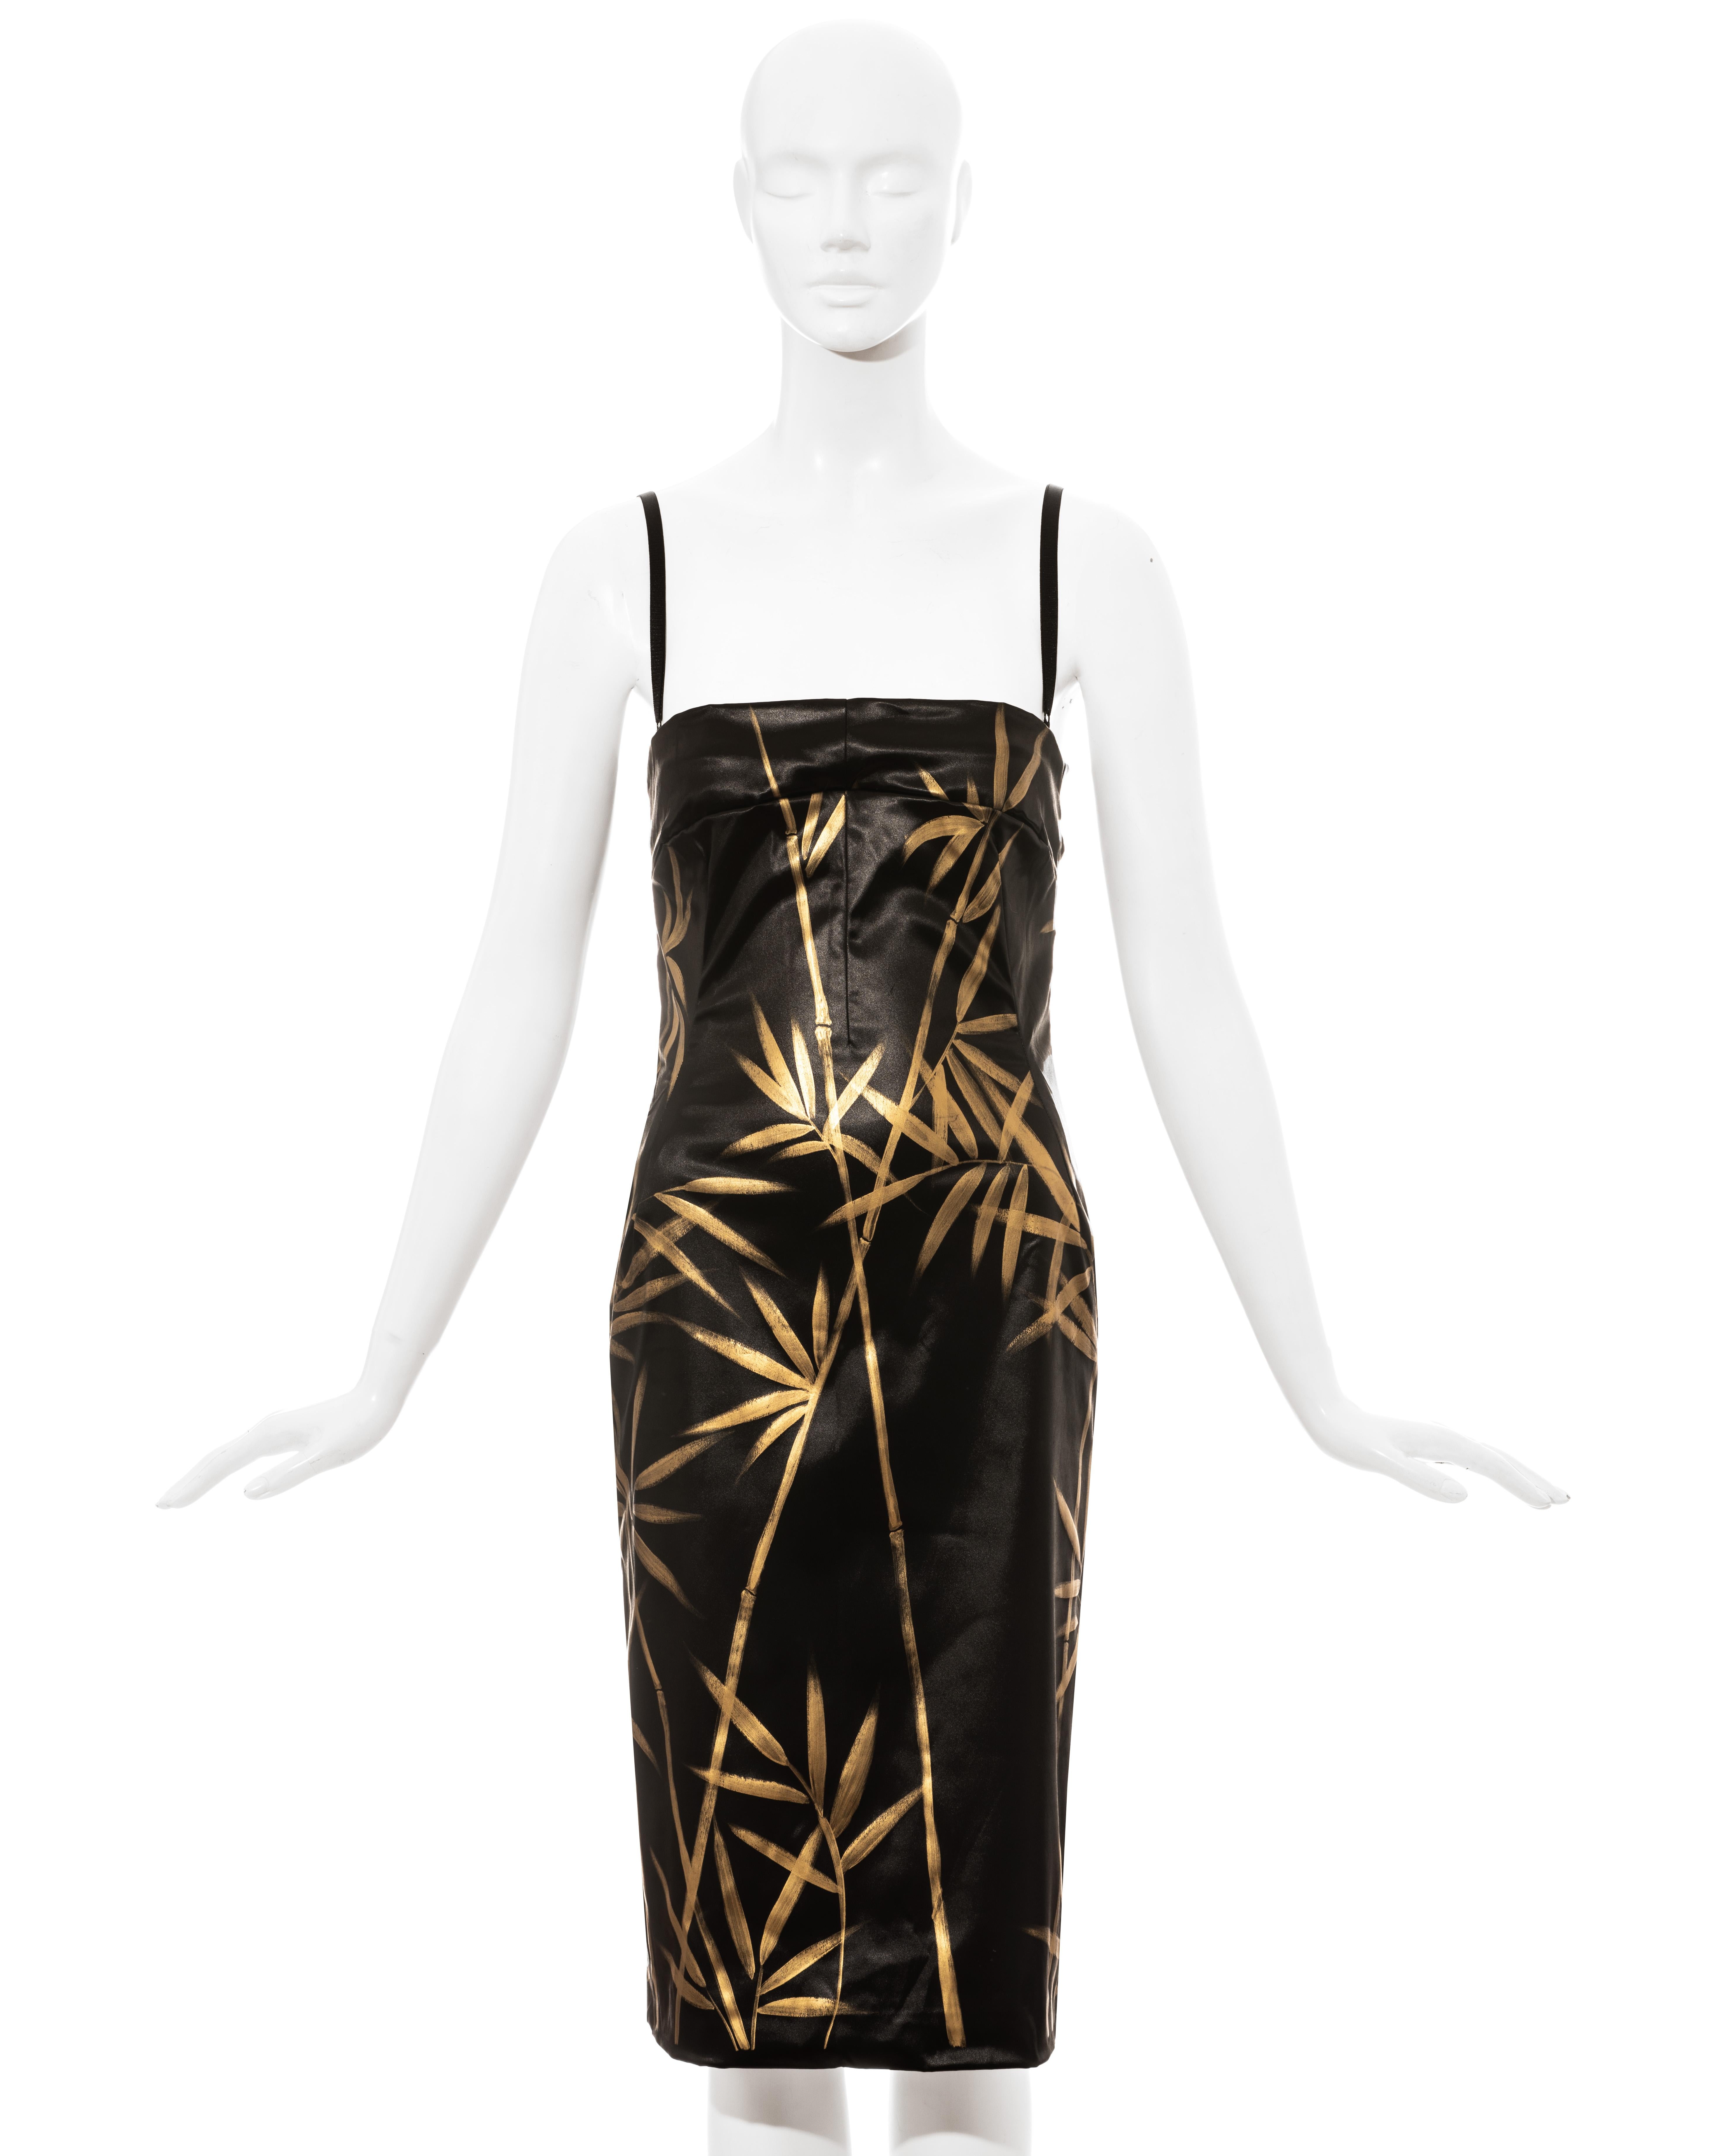 Dolce & Gabbana black wet look mid-length evening dress with gold painted plant print and built-in adjustable bra. 

Spring-Summer 1999